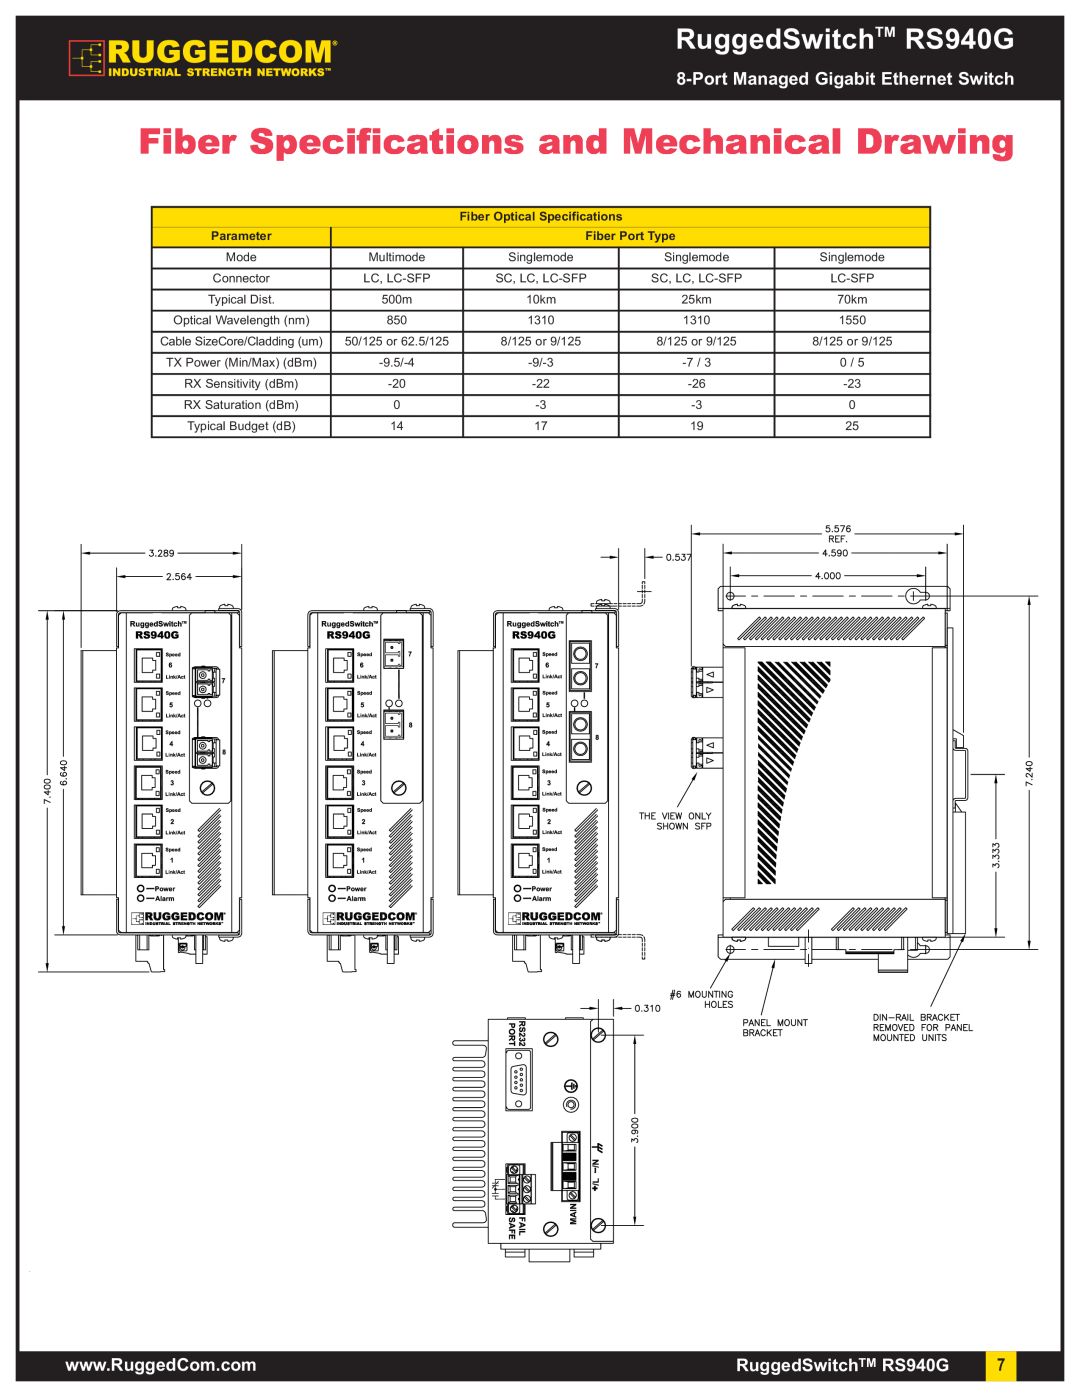 RuggedCom Fiber Specifications and Mechanical Drawing, RuggedSwitchTM RS940G, Port Managed Gigabit Ethernet Switch 